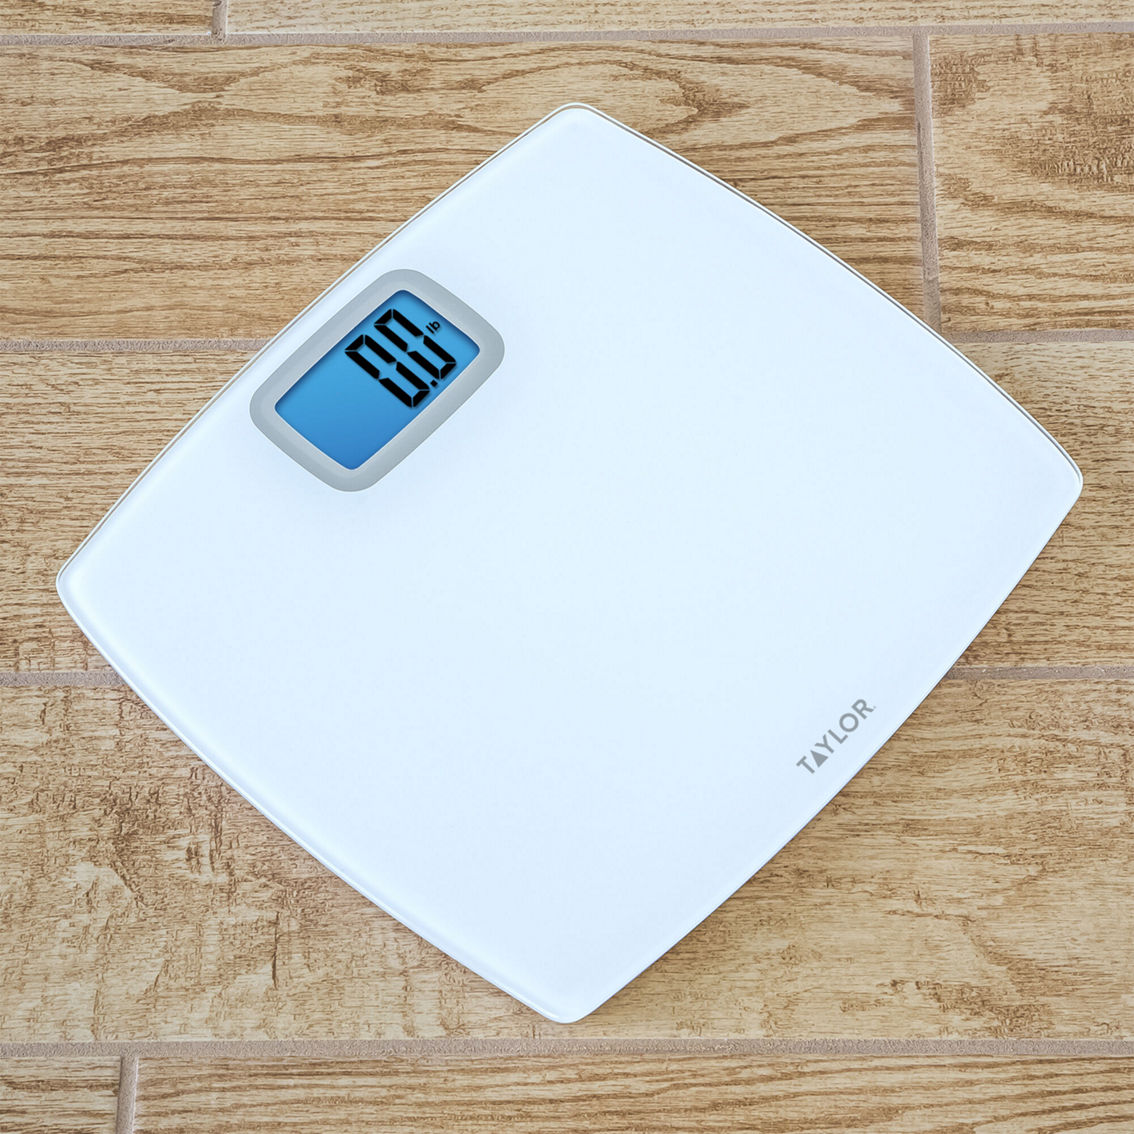 Taylor Pure White Digital Bathroom Scale - Image 4 of 6